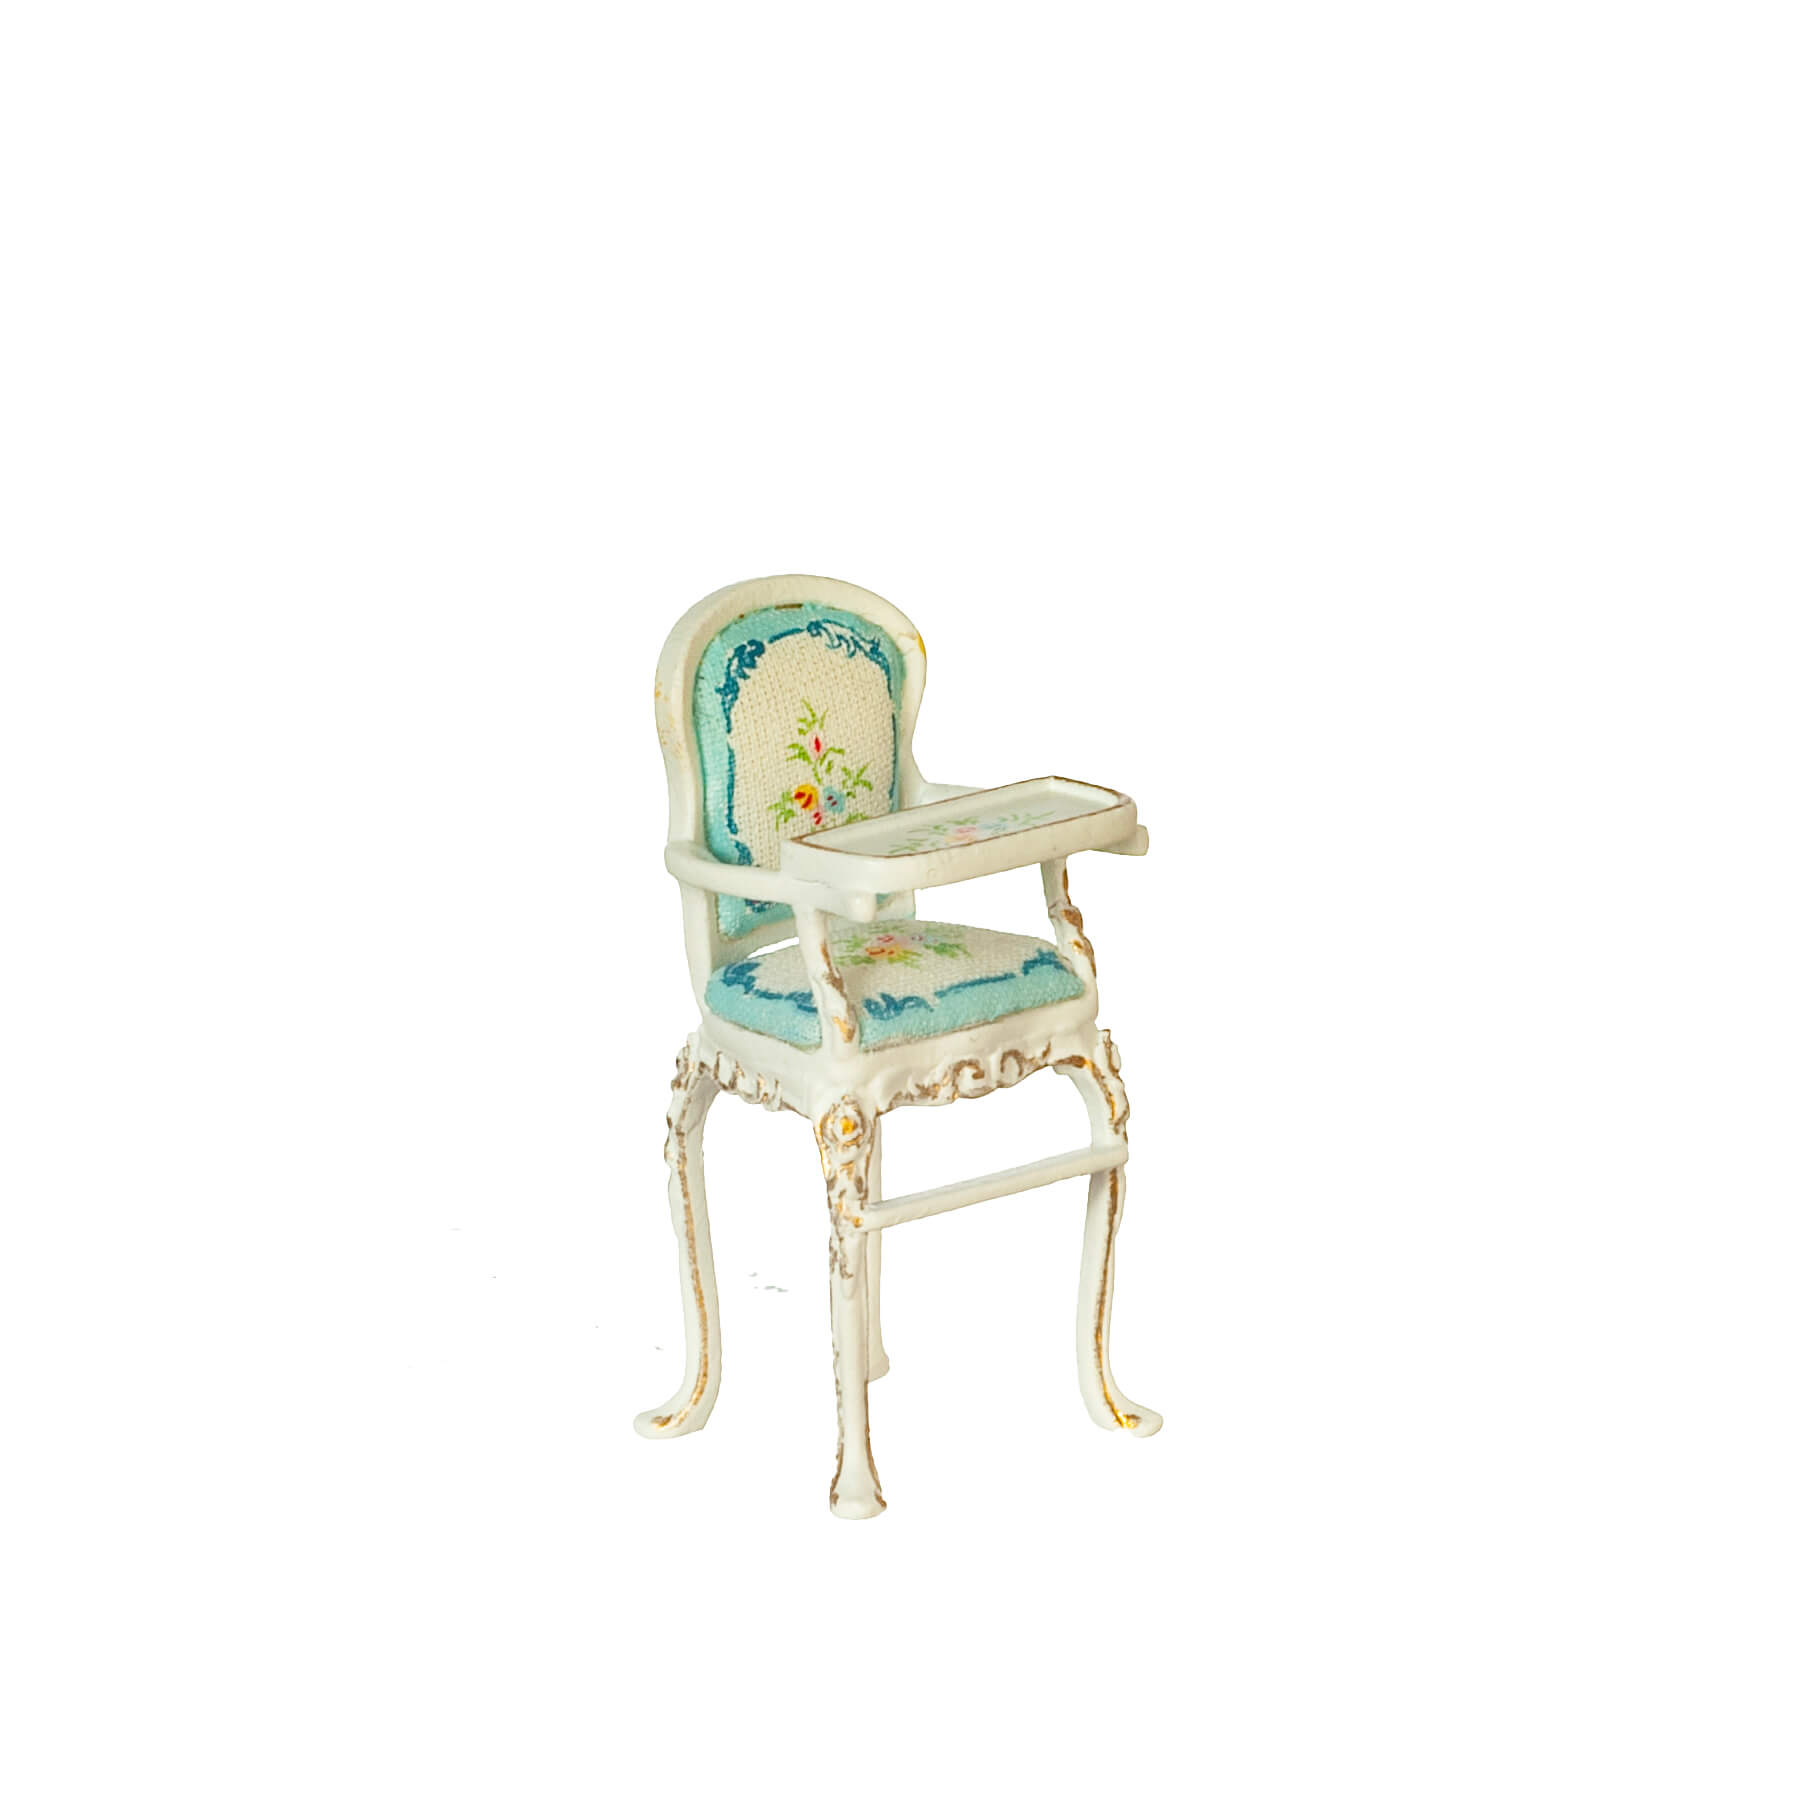 1/2in Scale Baby High Chair - White